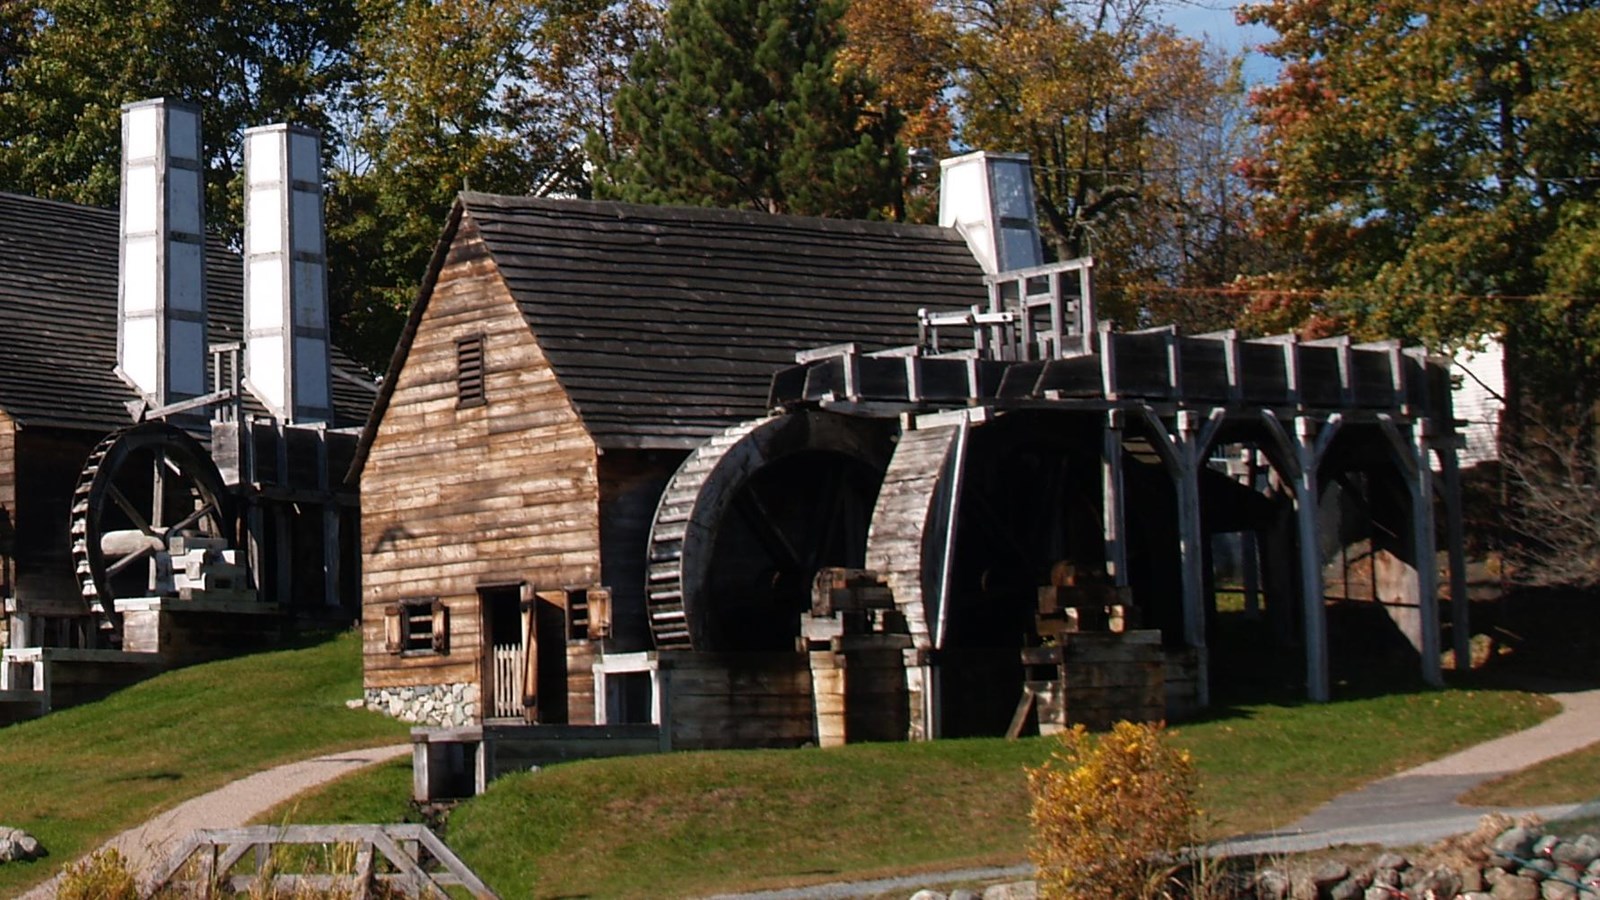 A wooden barn-like structure with two water wheels and a chimney in the back